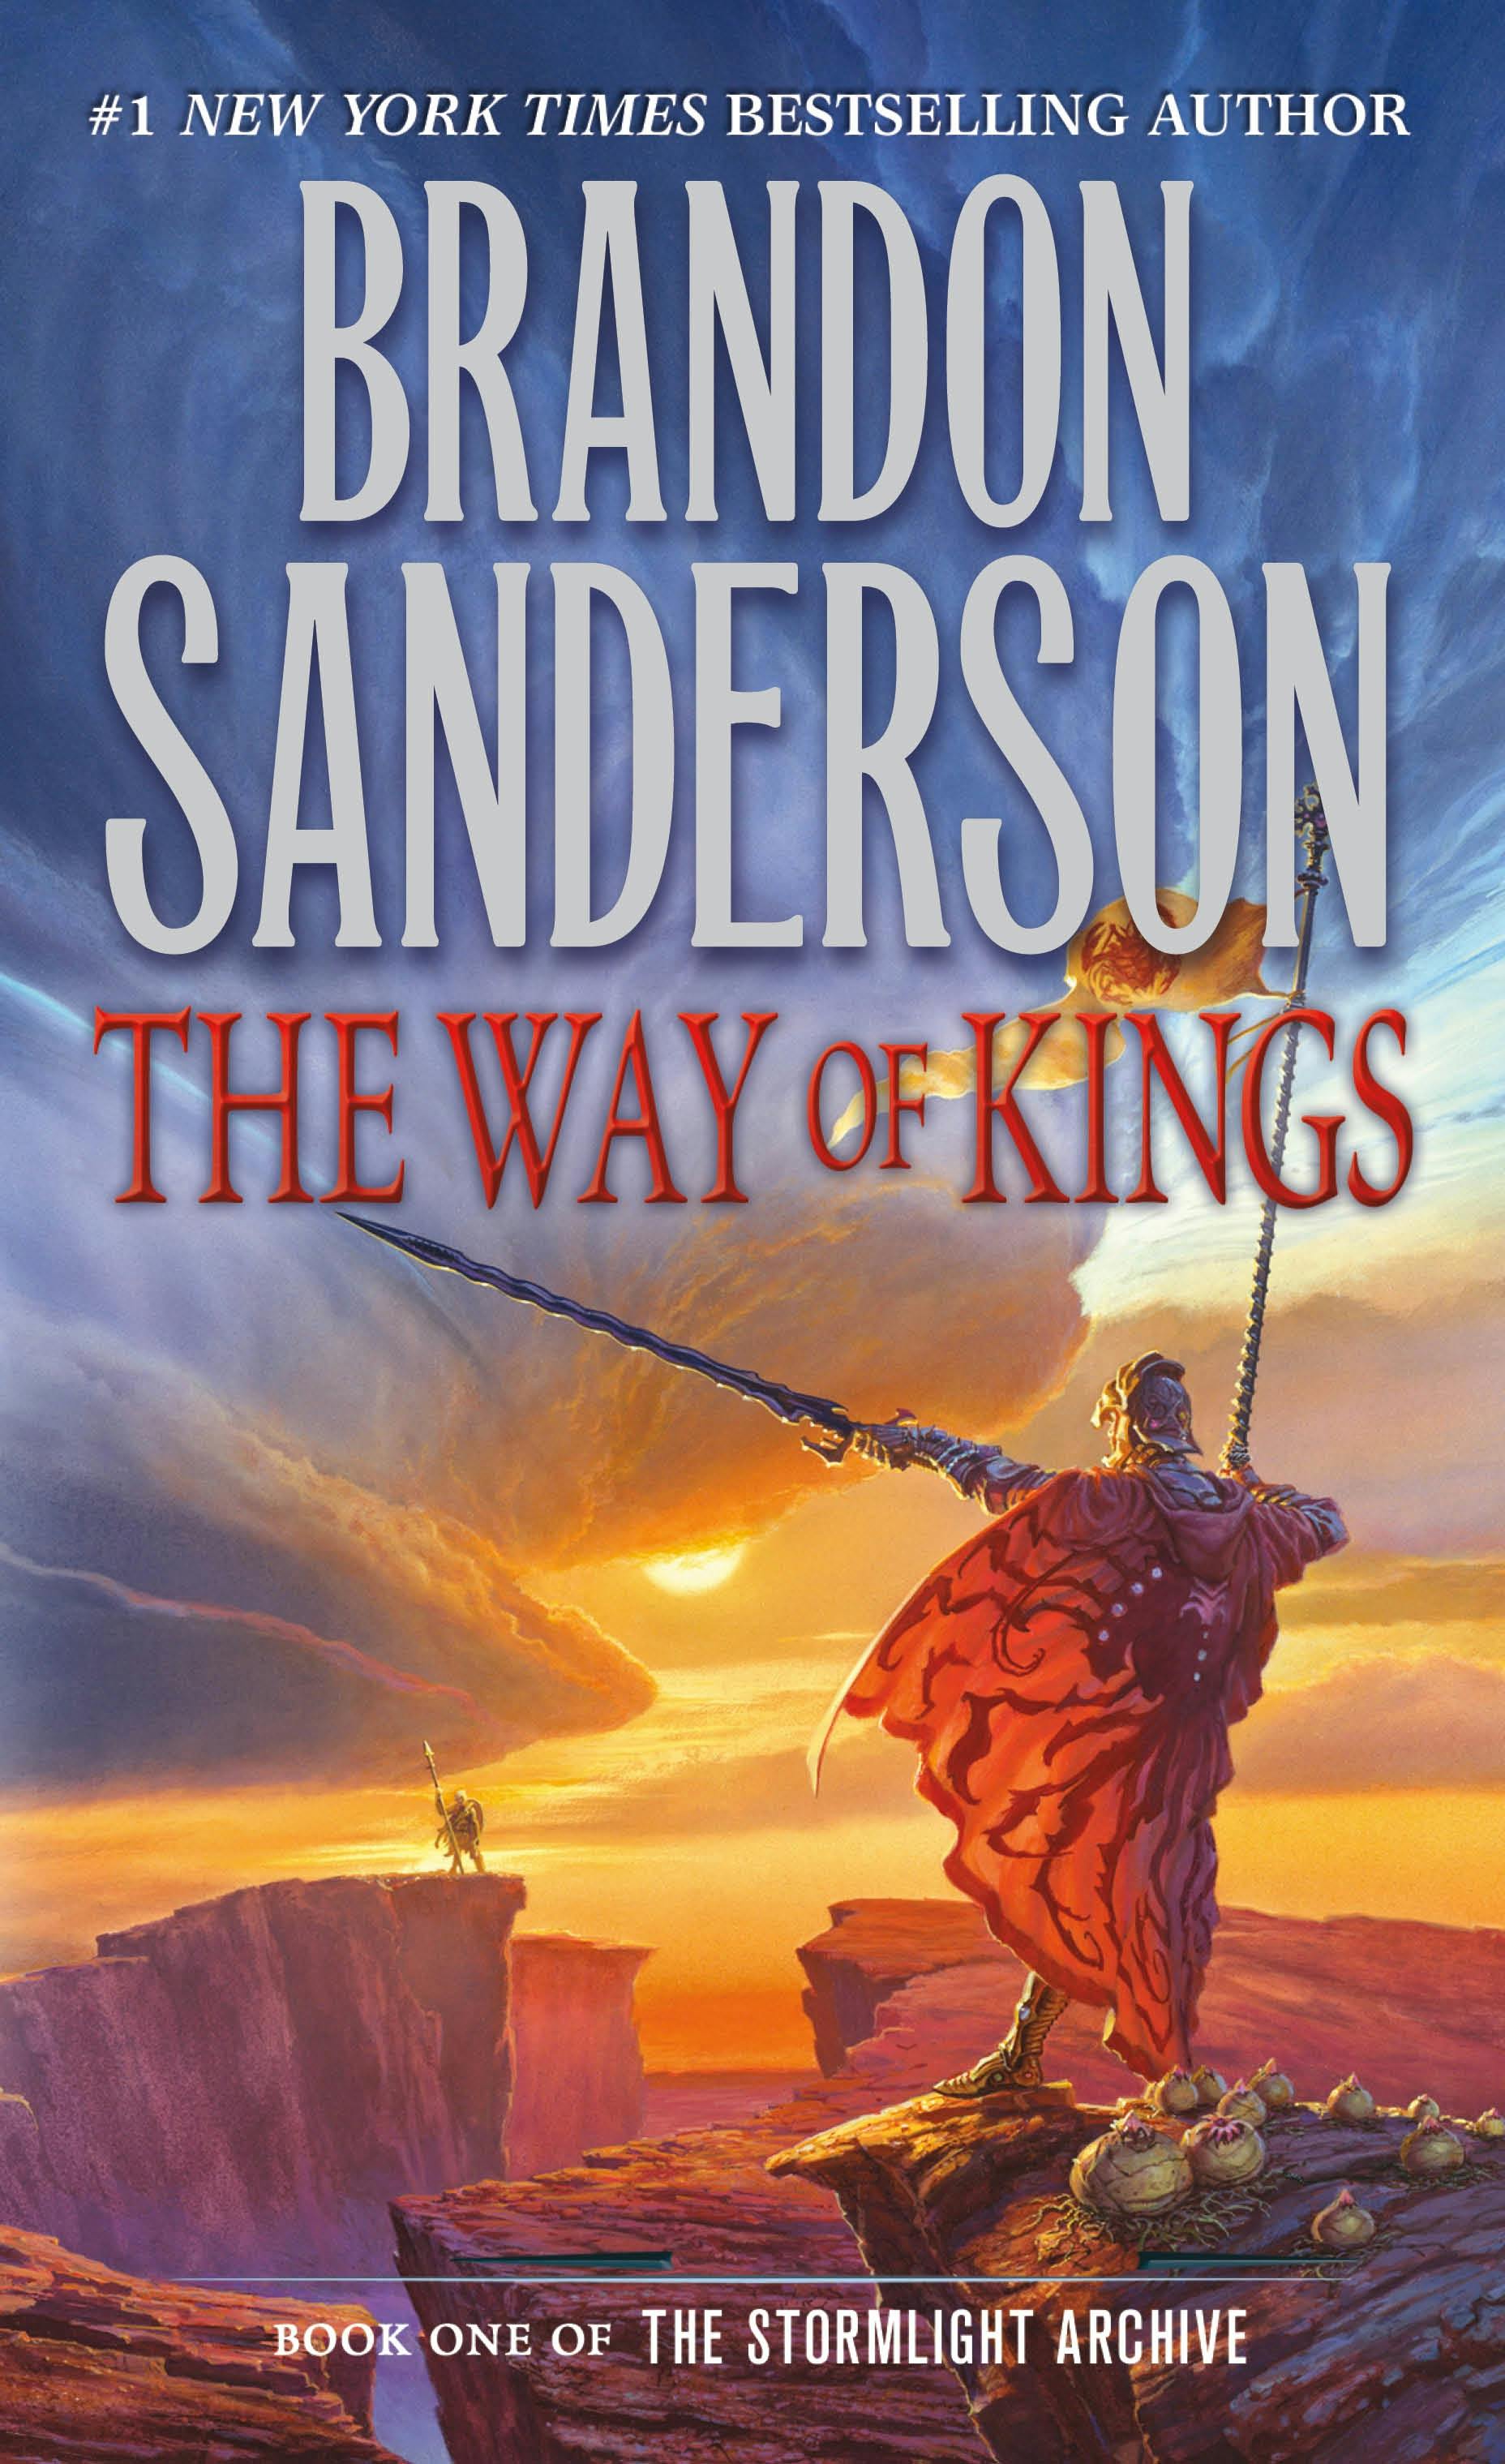 For Brandon Sanderson, It's Back to the Beginning